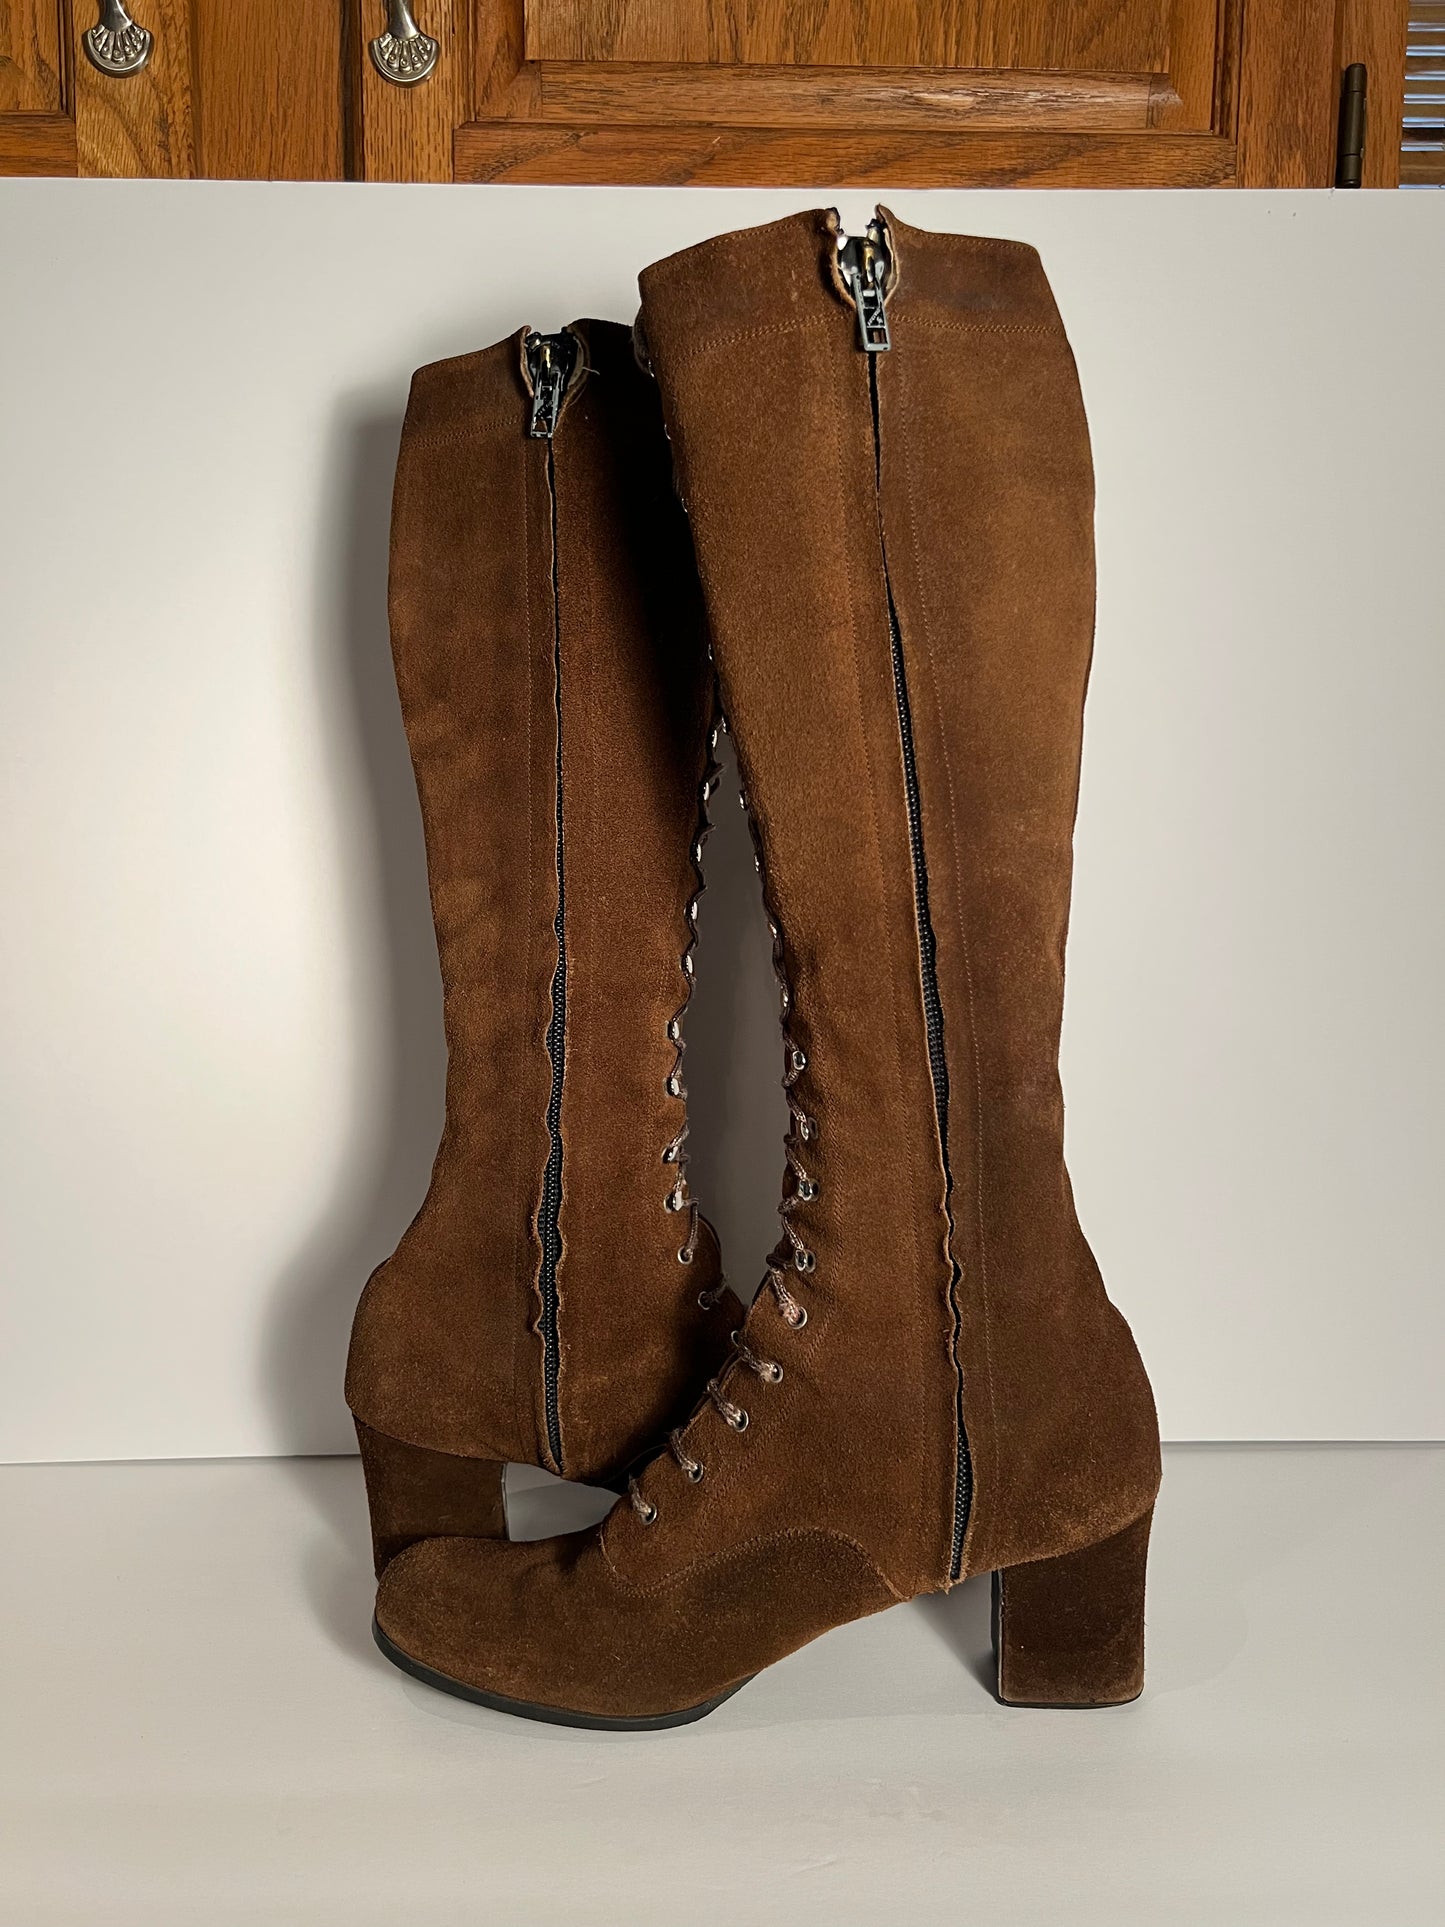 Vintage Brown Suede Lace-Up Go-Go Boots